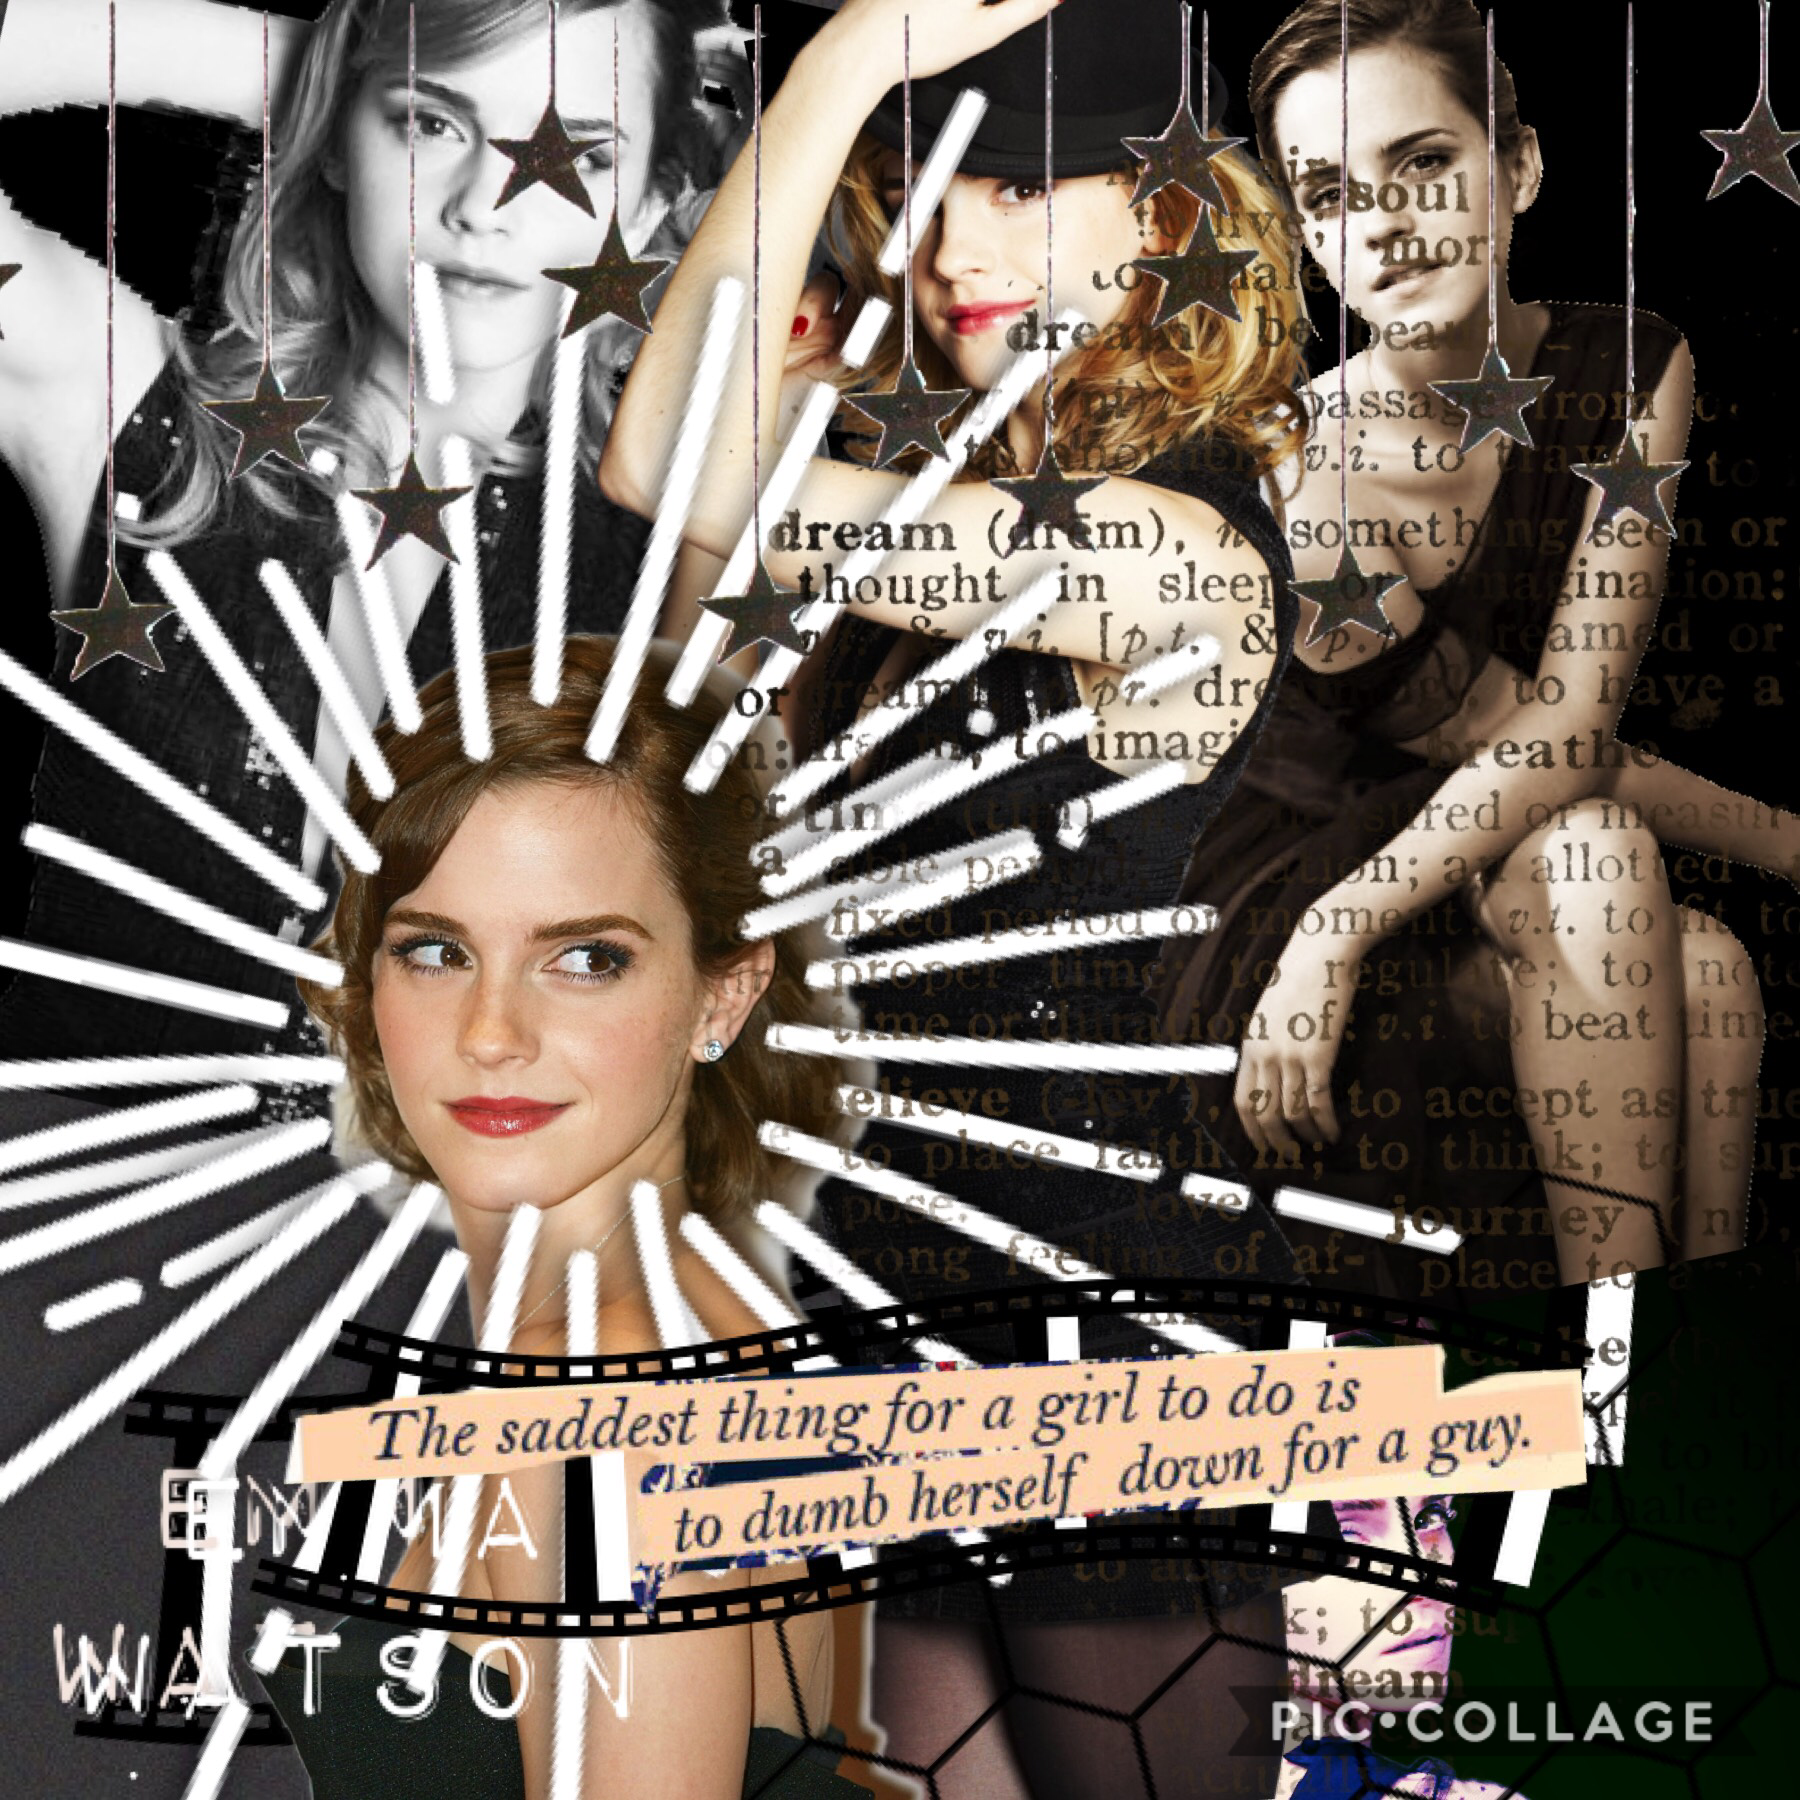 (:TAP:)
I LOVE Emma Watson AKA Hermione whom I also love she is an amazing actress and so inspiring and beautiful so I was out of ideas so I did this:)